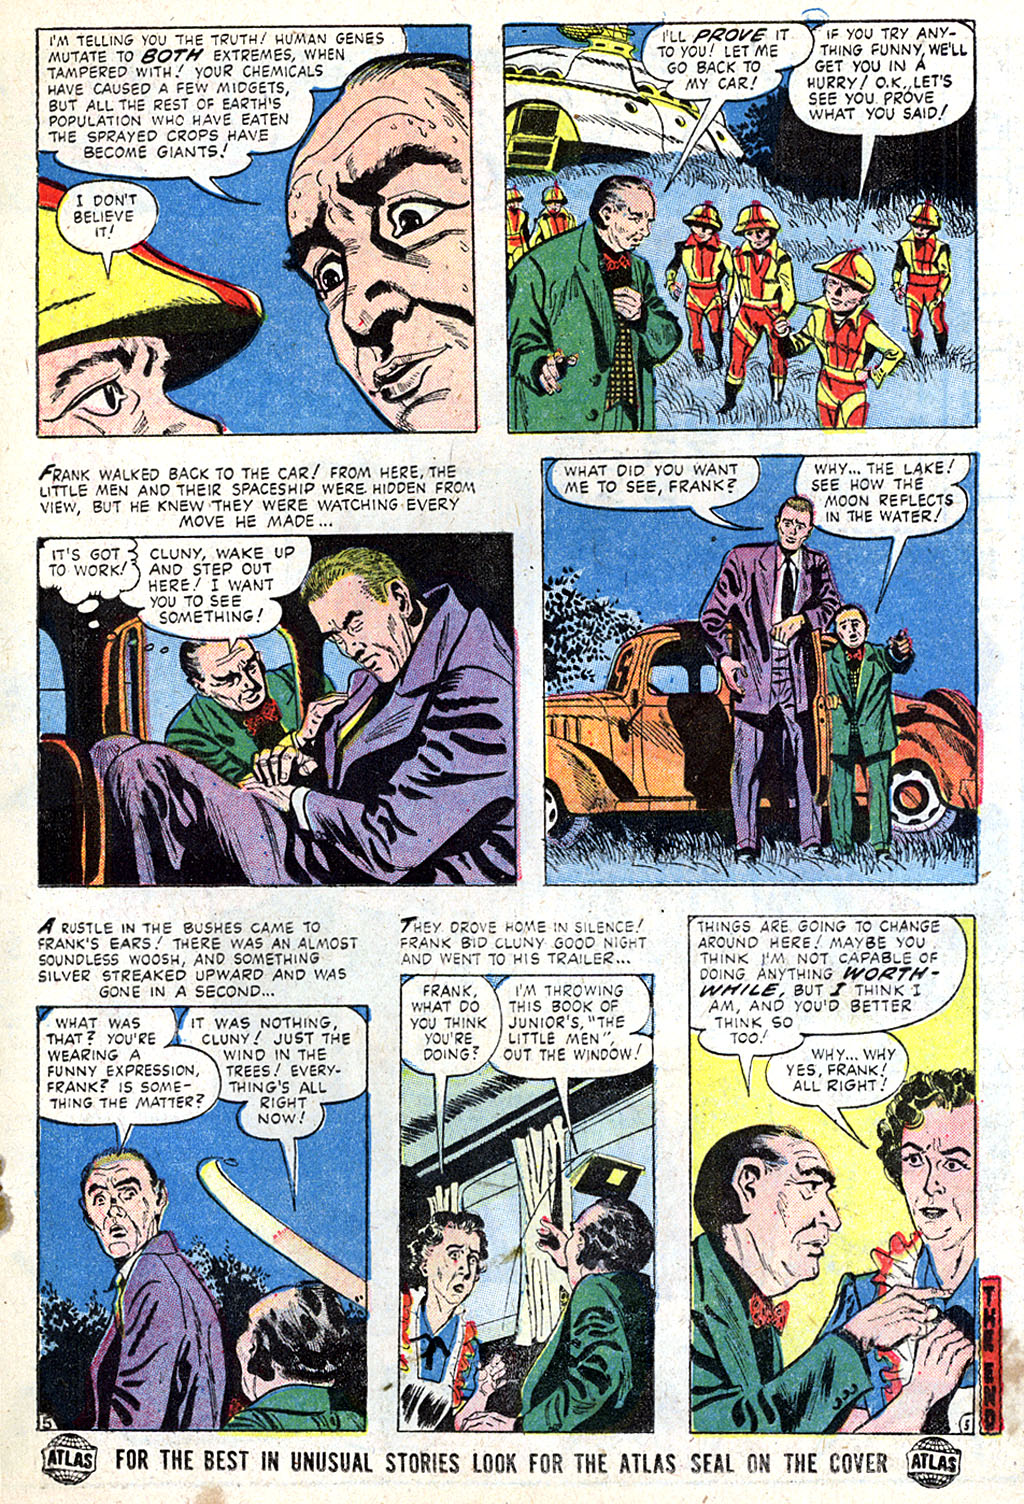 Marvel Tales (1949) 138 Page 16